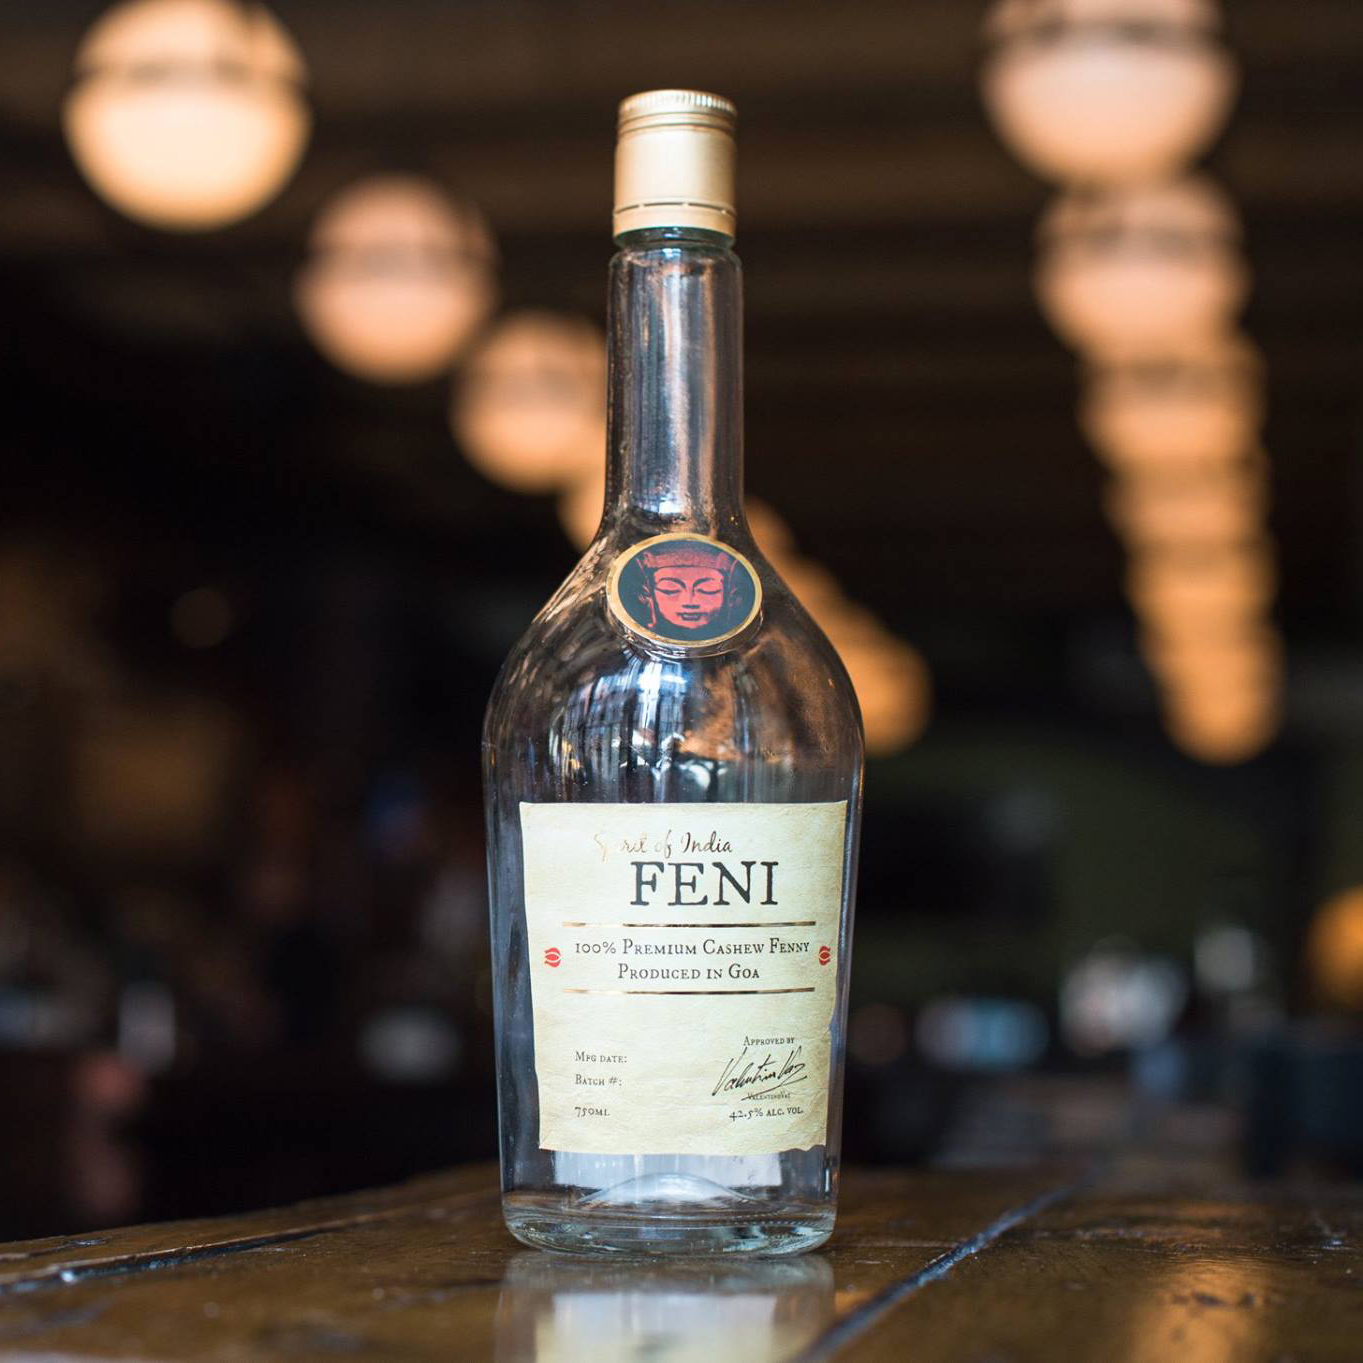 What is Feni?